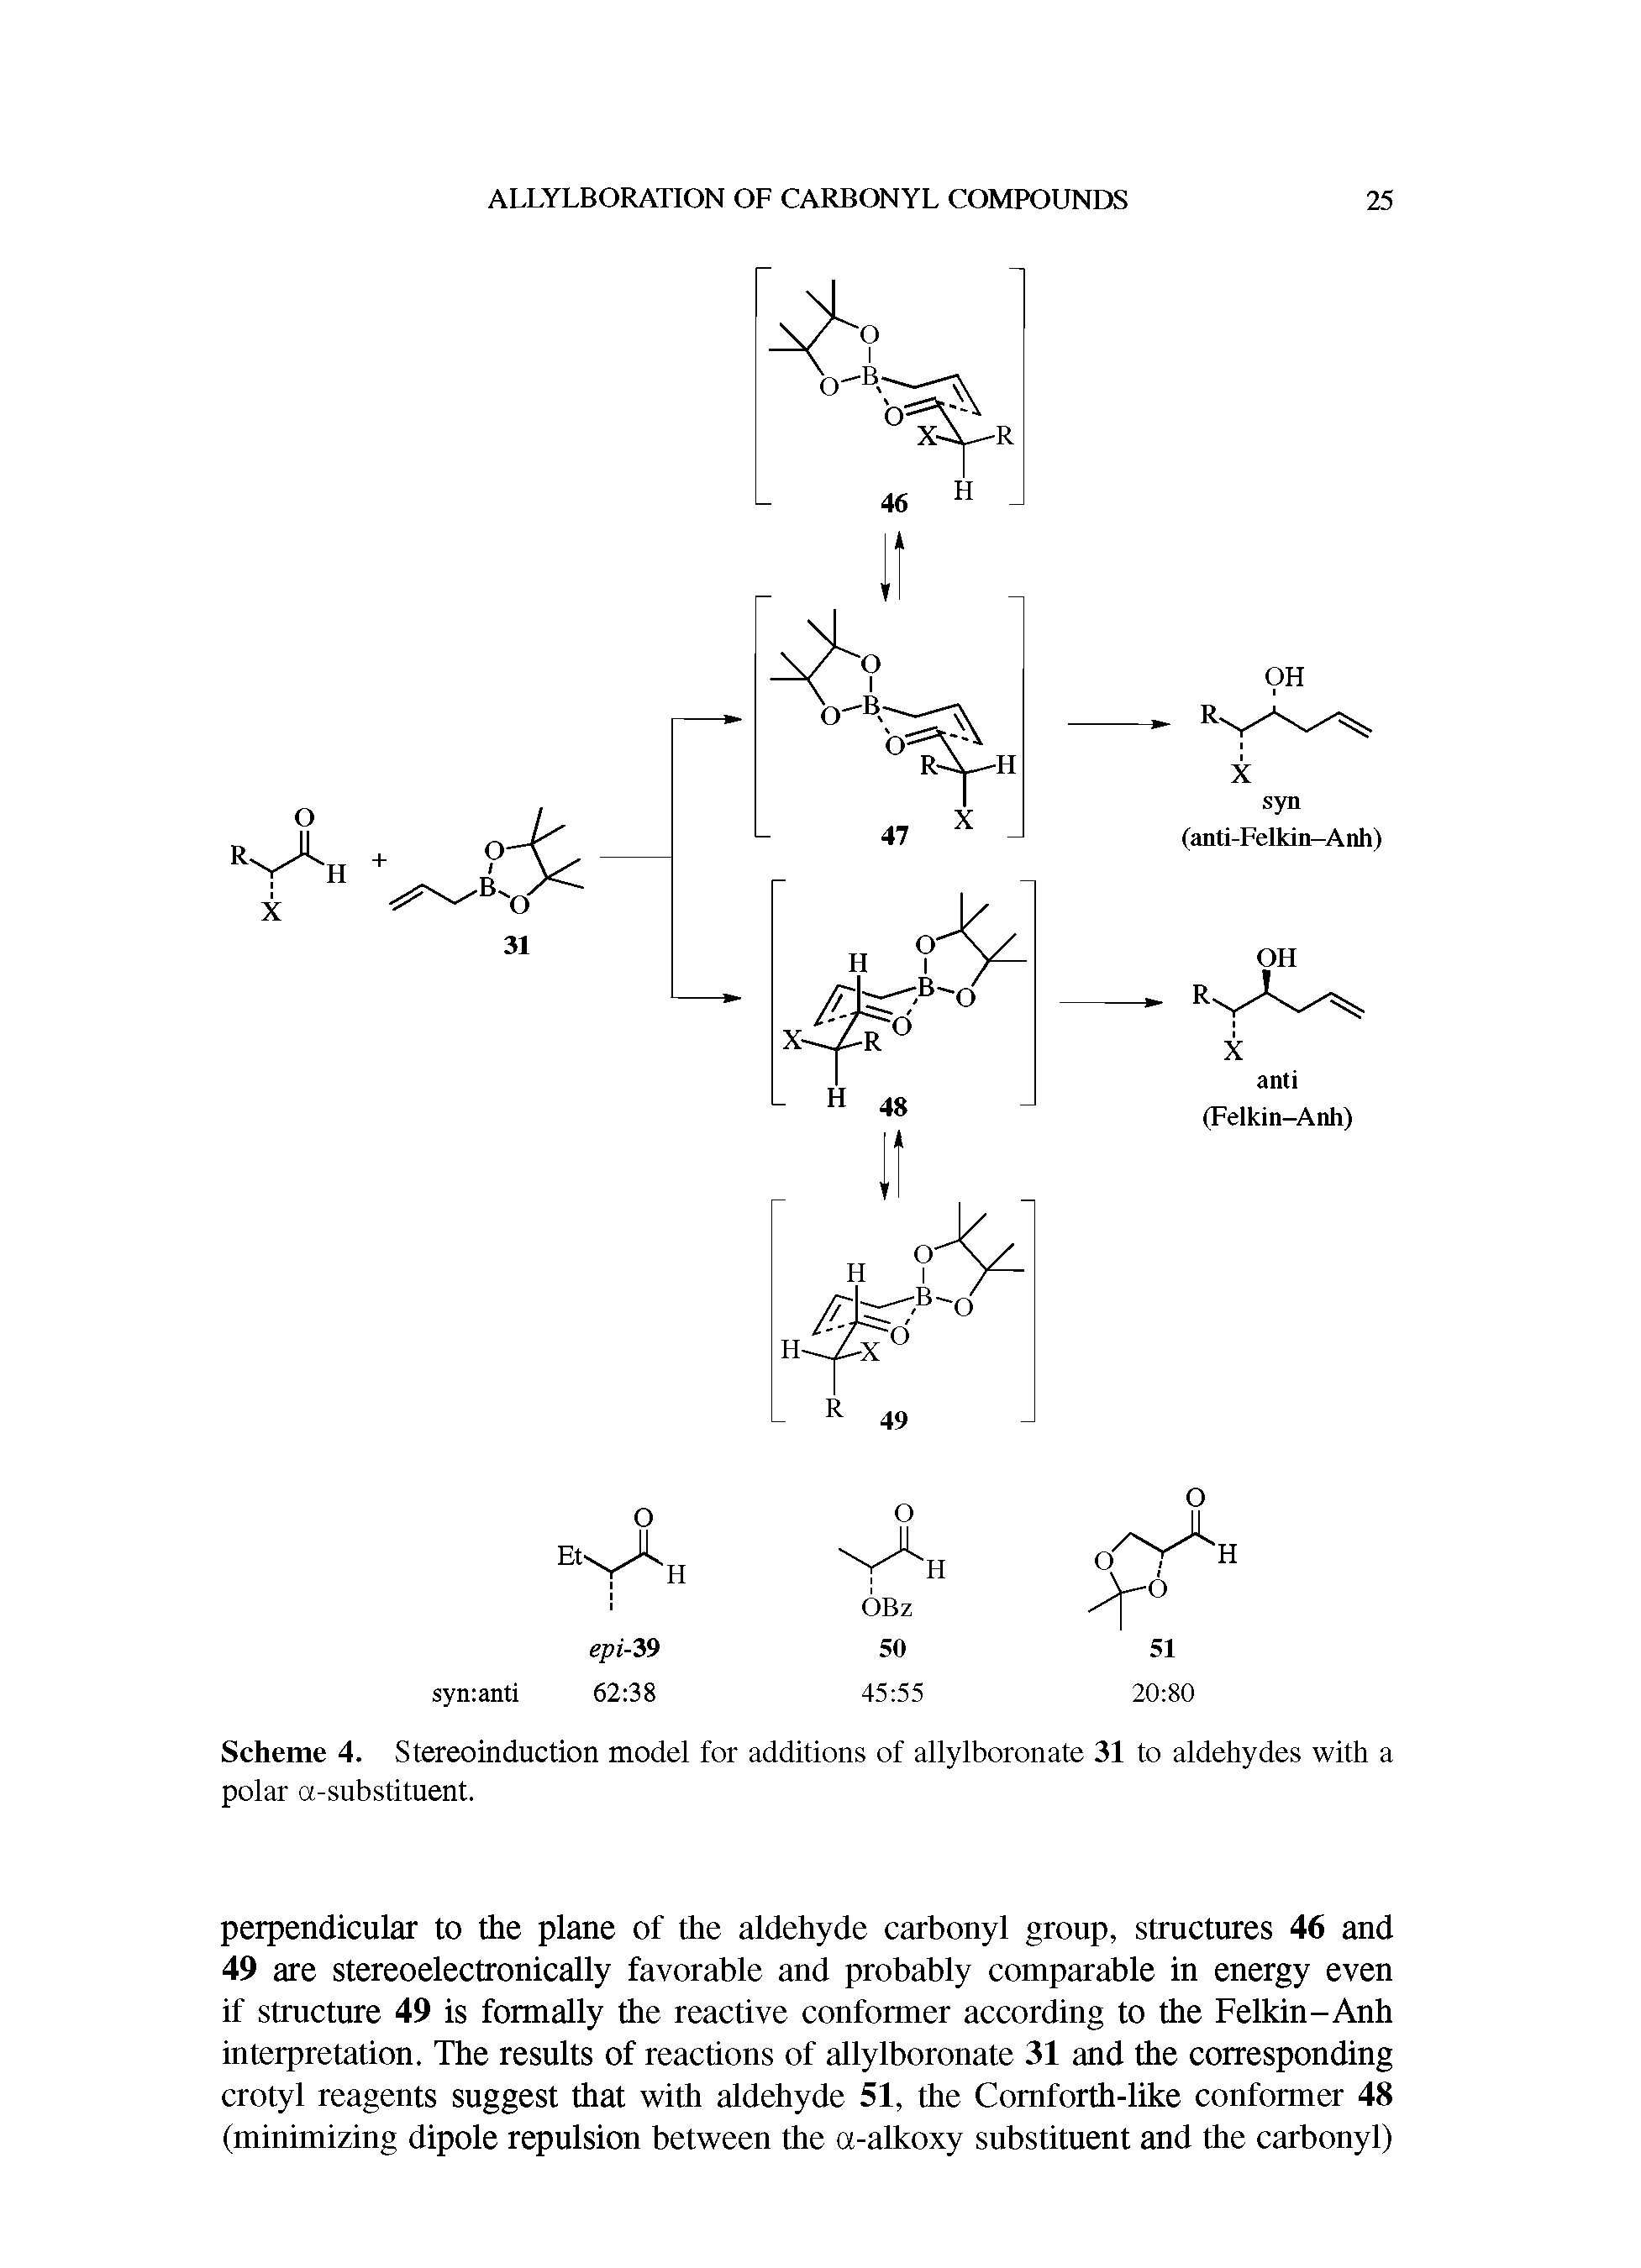 Scheme 4. Stereoinduction model for additions of allylboronate 31 to aldehydes with a polar a-substituent.